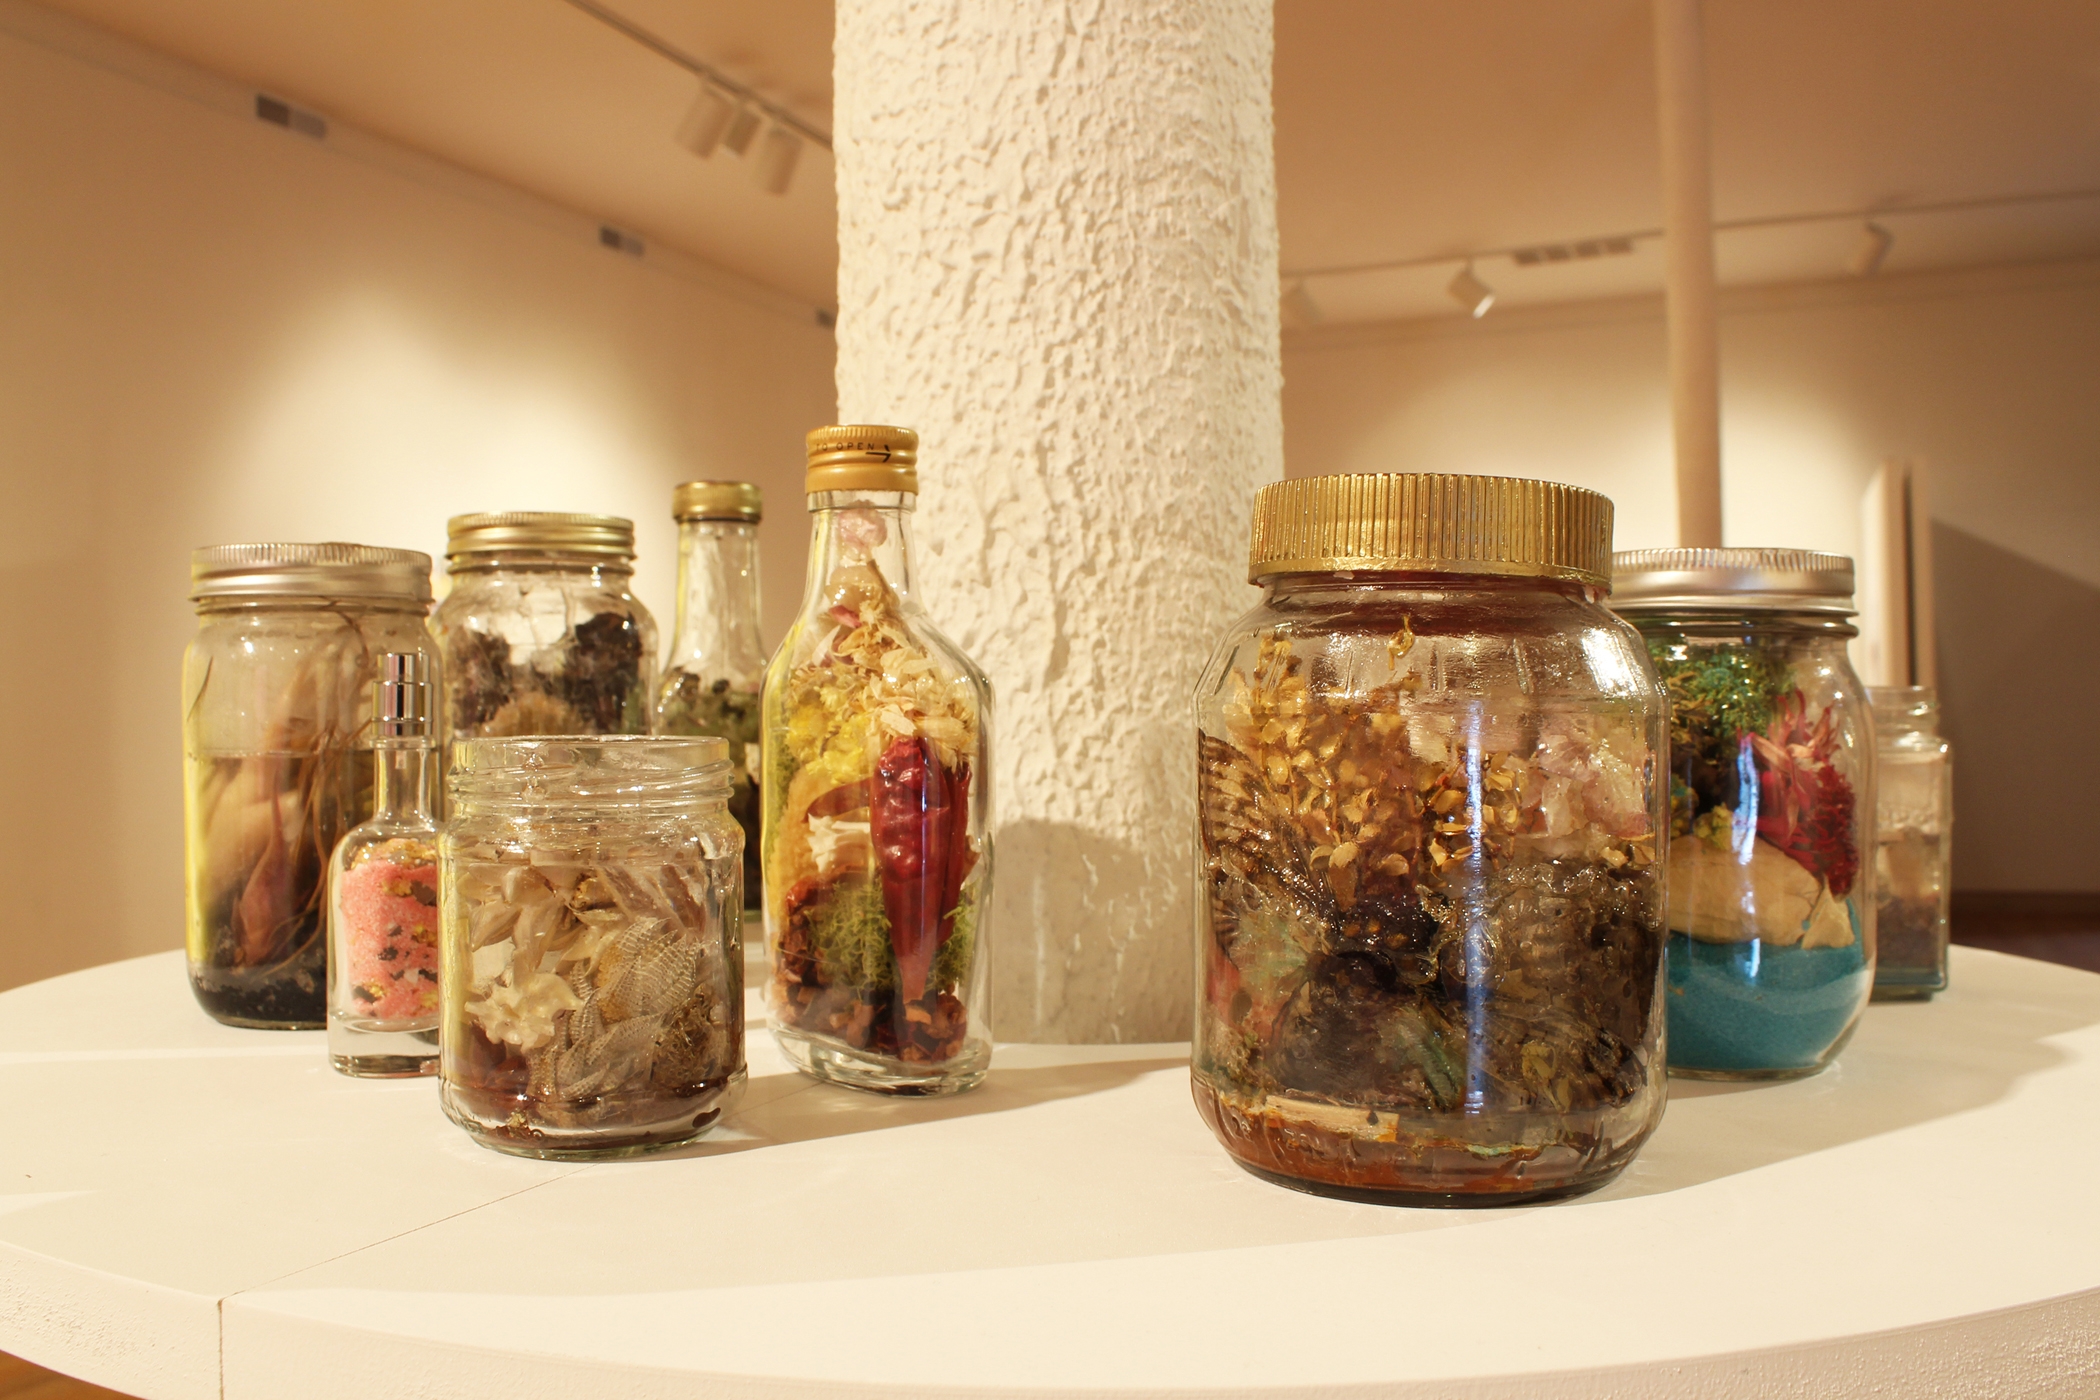 Rhonda Wheatley, Elixir Stills and Cure Bottles, 2017. Activate by gazing into jars and bottles. Gazing must be 100% voluntary. Healing intent and energy, incantations, secret herbs, sea horses, cicadas, snake bones, snakeskin sheddings, moss, dried flowers, sea shells, sand, wasp nests, succulent plants, various crystals (including amber, mica flakes, and pyrite), and more. Fourteen jars and bottles of assorted sizes rest on a round shelf encircling a column in the middle of the gallery. The clear vessels are filled with assorted organic materials, sand, and resin. Photo courtesy of the Ukrainian Institute of Modern Art.